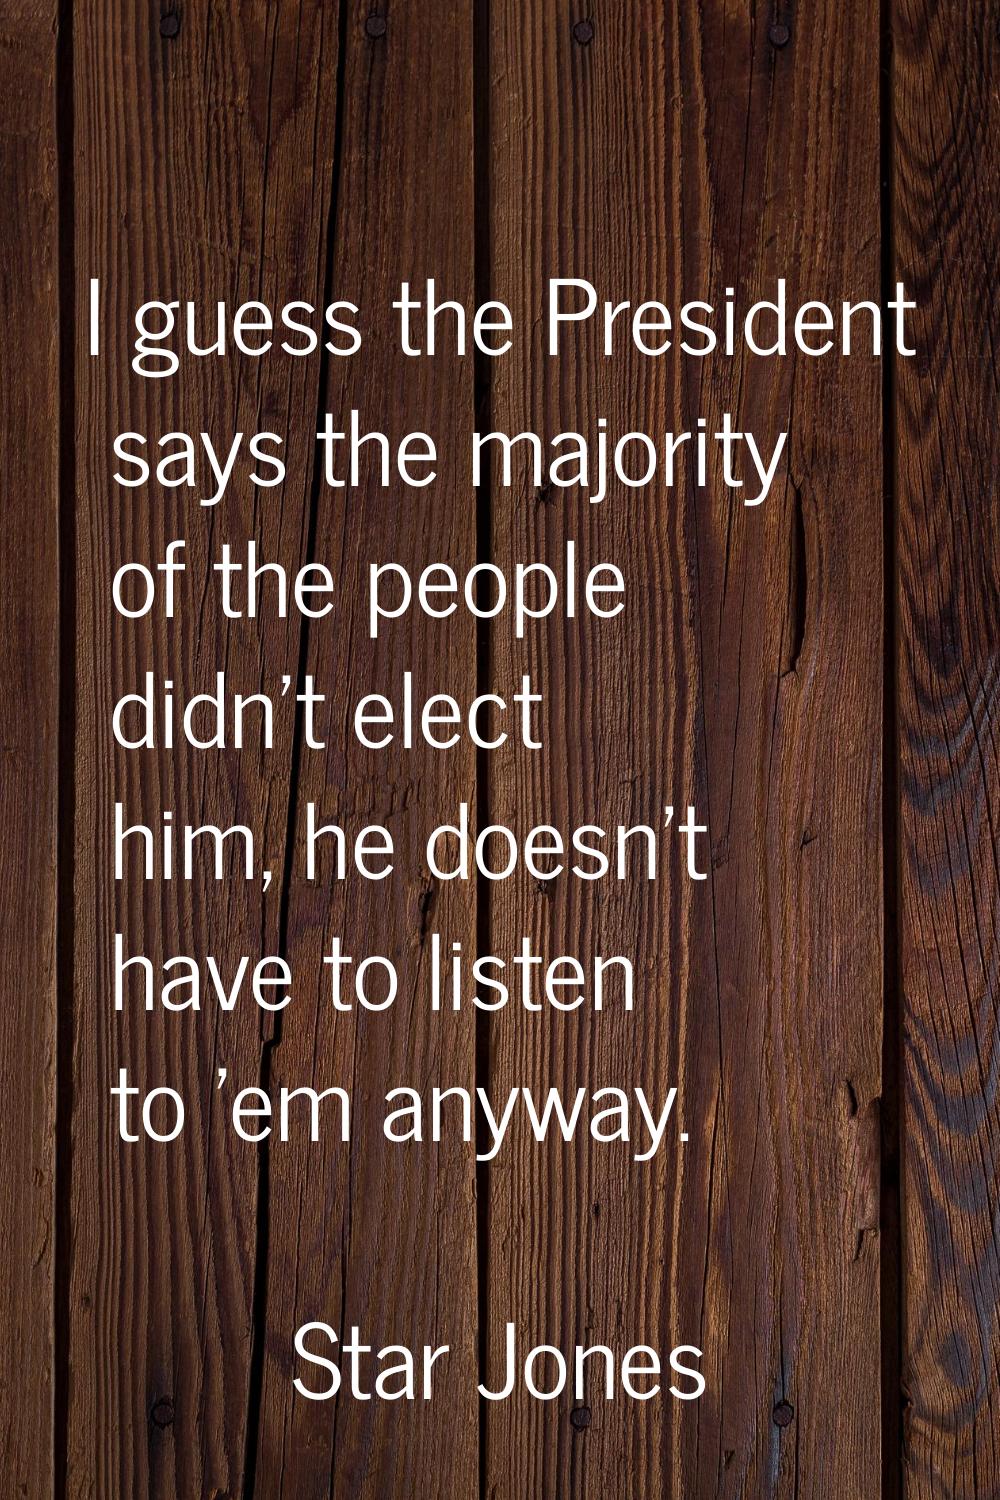 I guess the President says the majority of the people didn't elect him, he doesn't have to listen t